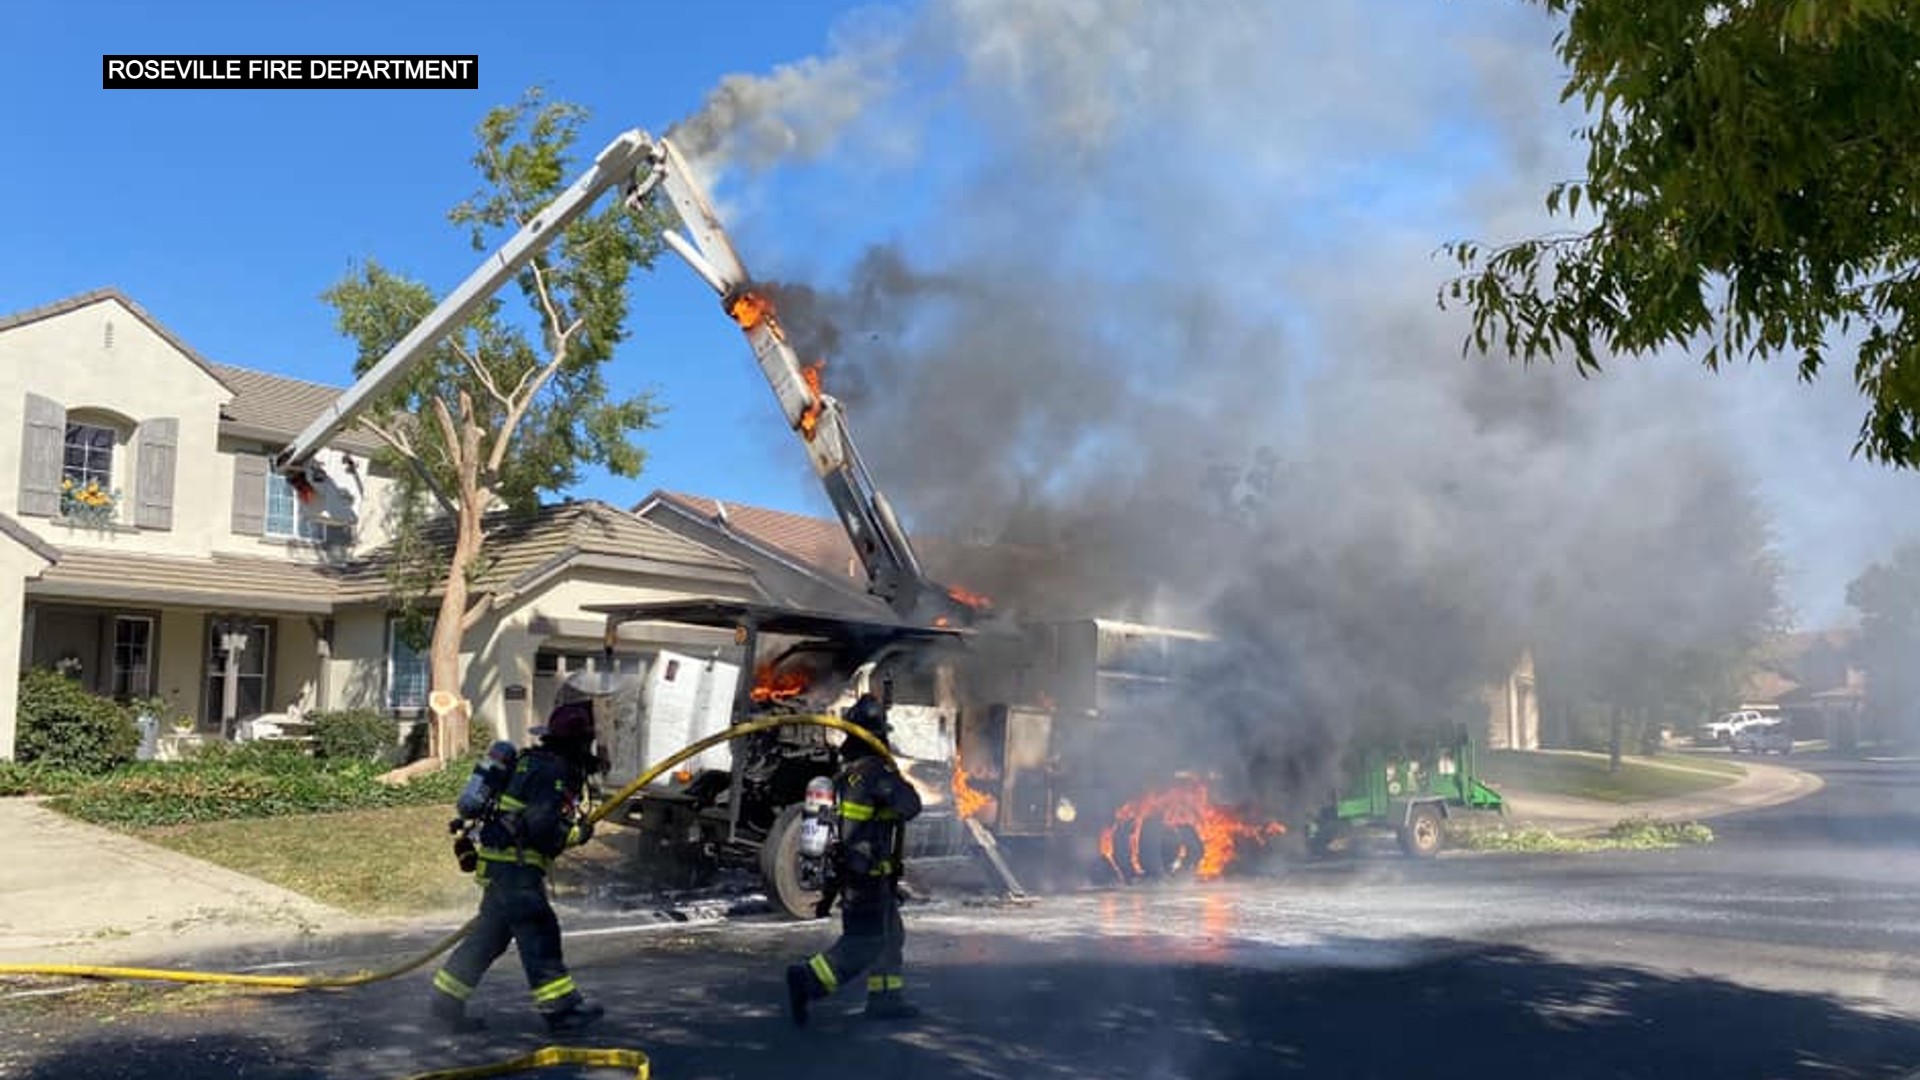 Tree Trimming Truck Catches Fire Near Roseville Home